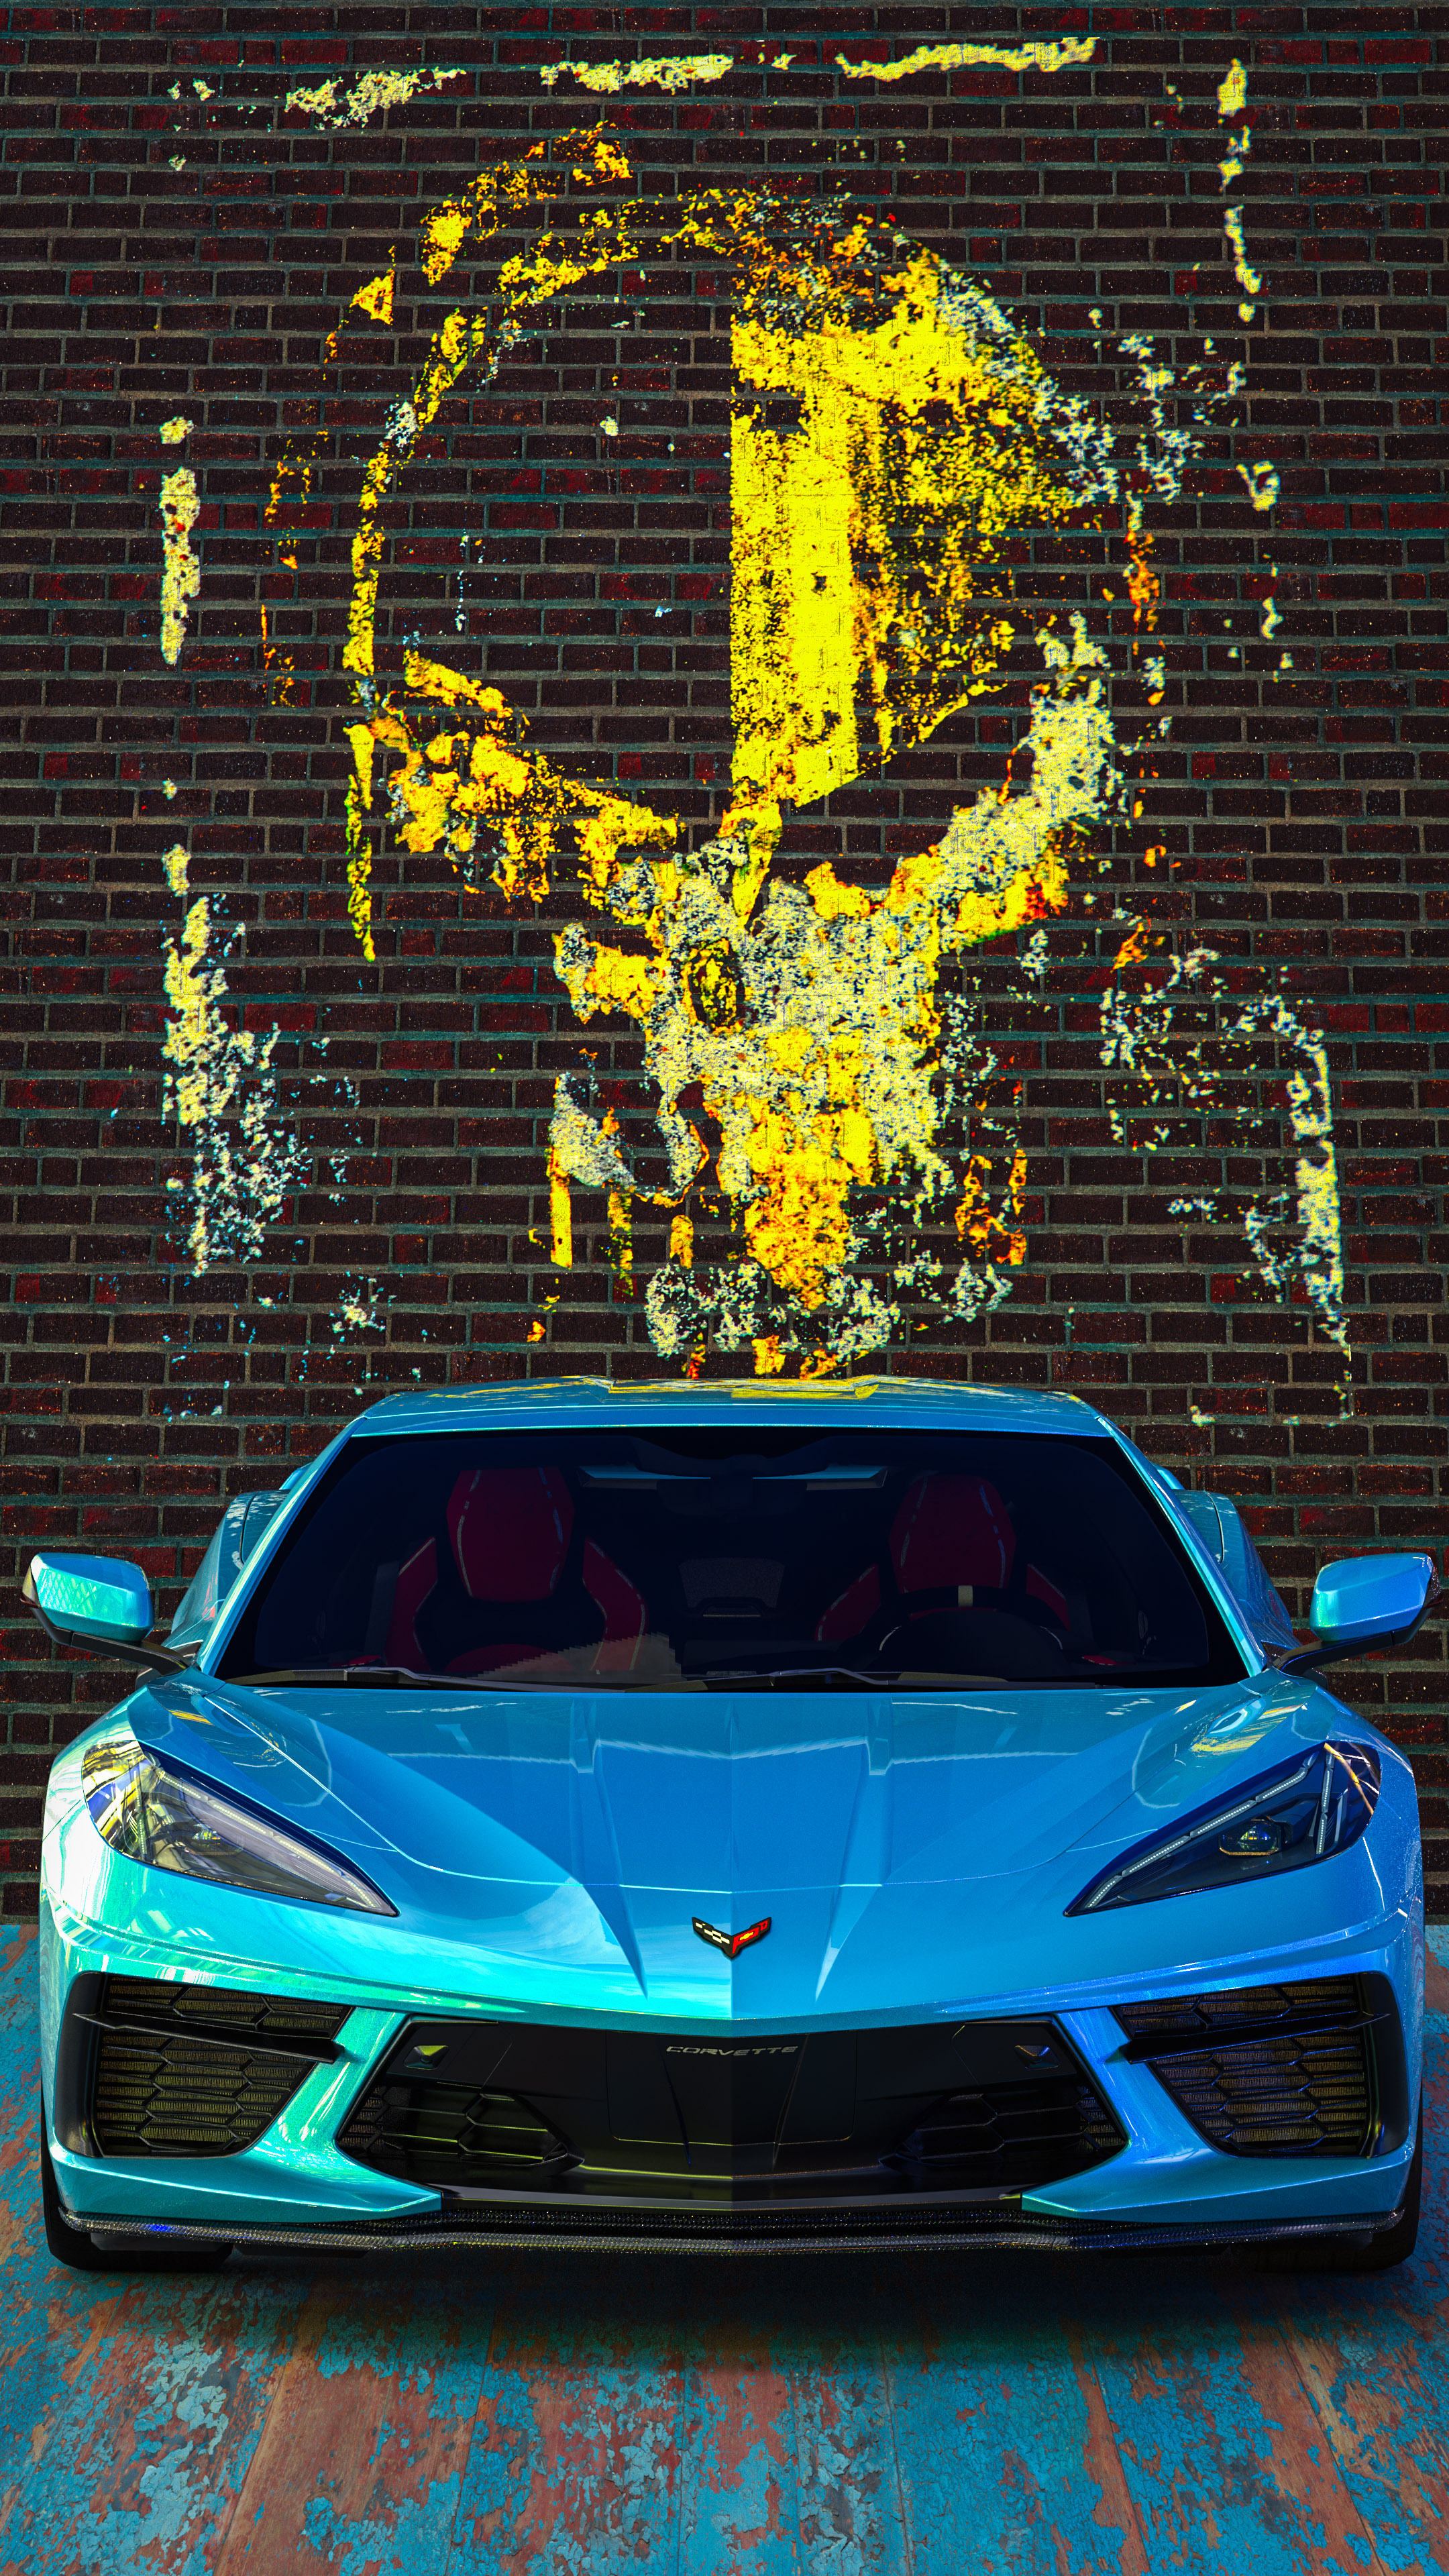 Transform your iPhone into a gallery of automotive excellence with the cool car wallpaper for iPhone, featuring the Chevrolet Corvette C8 in striking HD resolution.